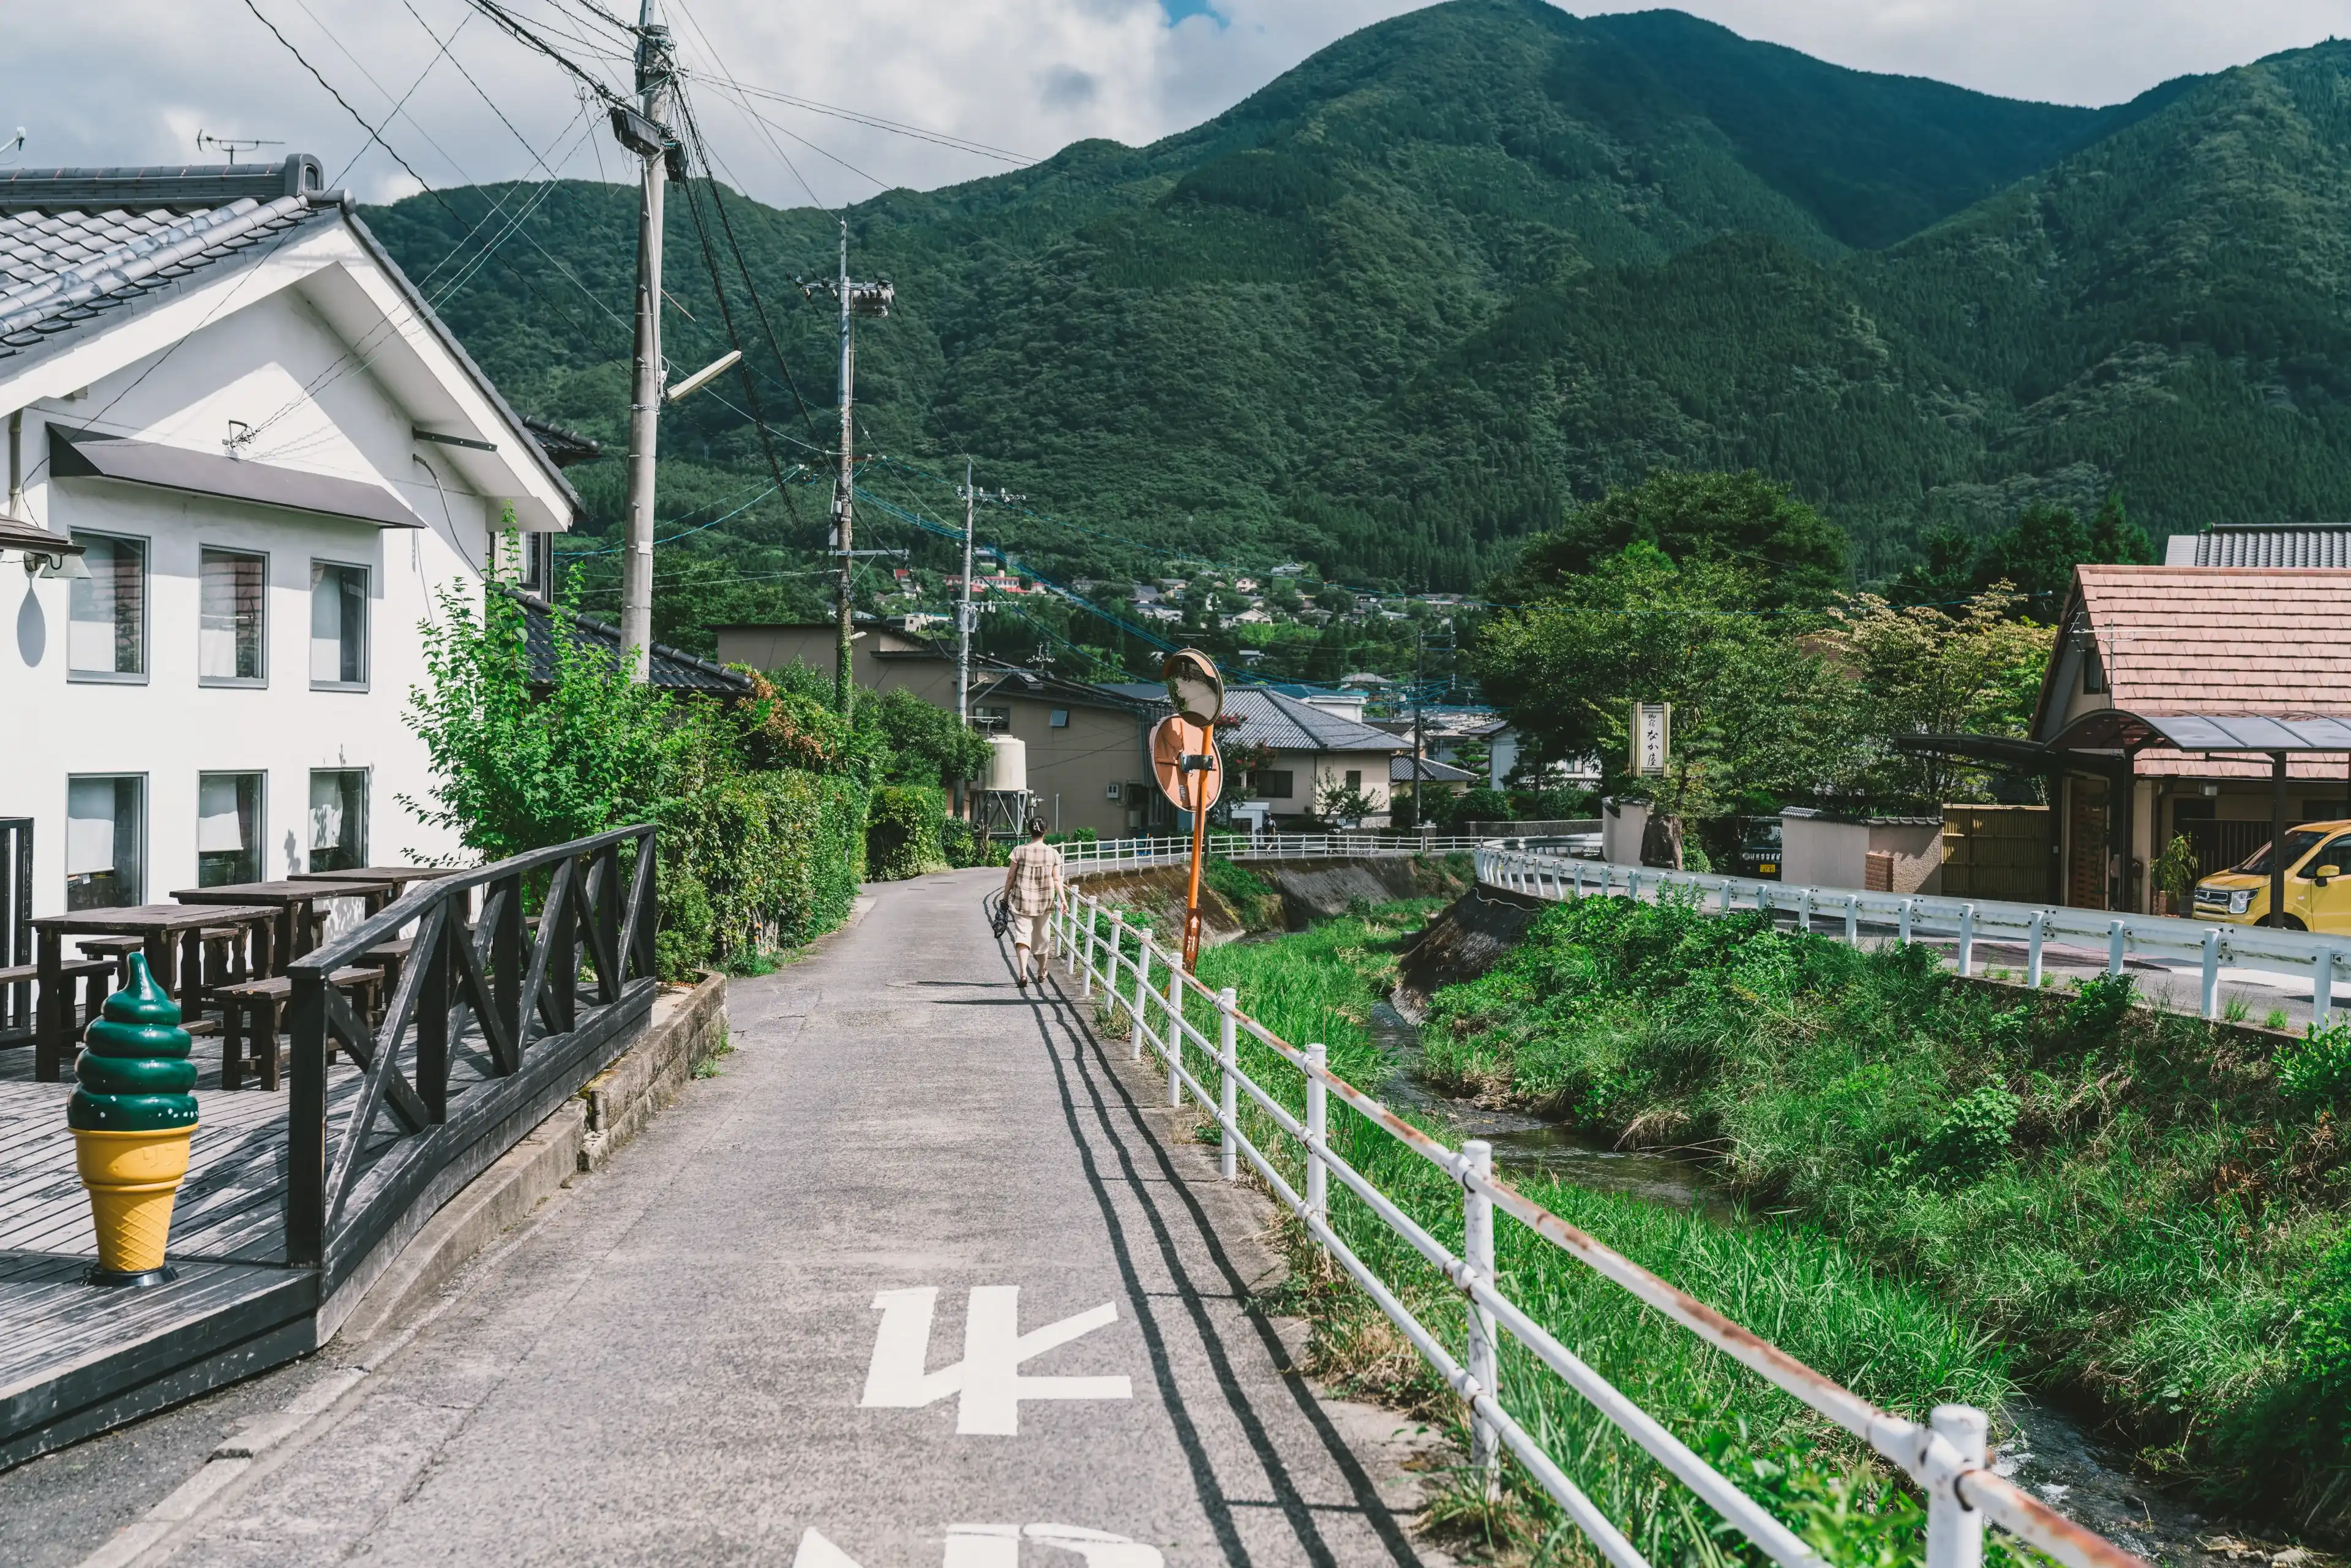 Yufuin, Ōita Prefecture / Japan - August 20 2018 : A town located in Ōita District, Ōita Prefecture, Japan. A popular place for hot spring tourists.